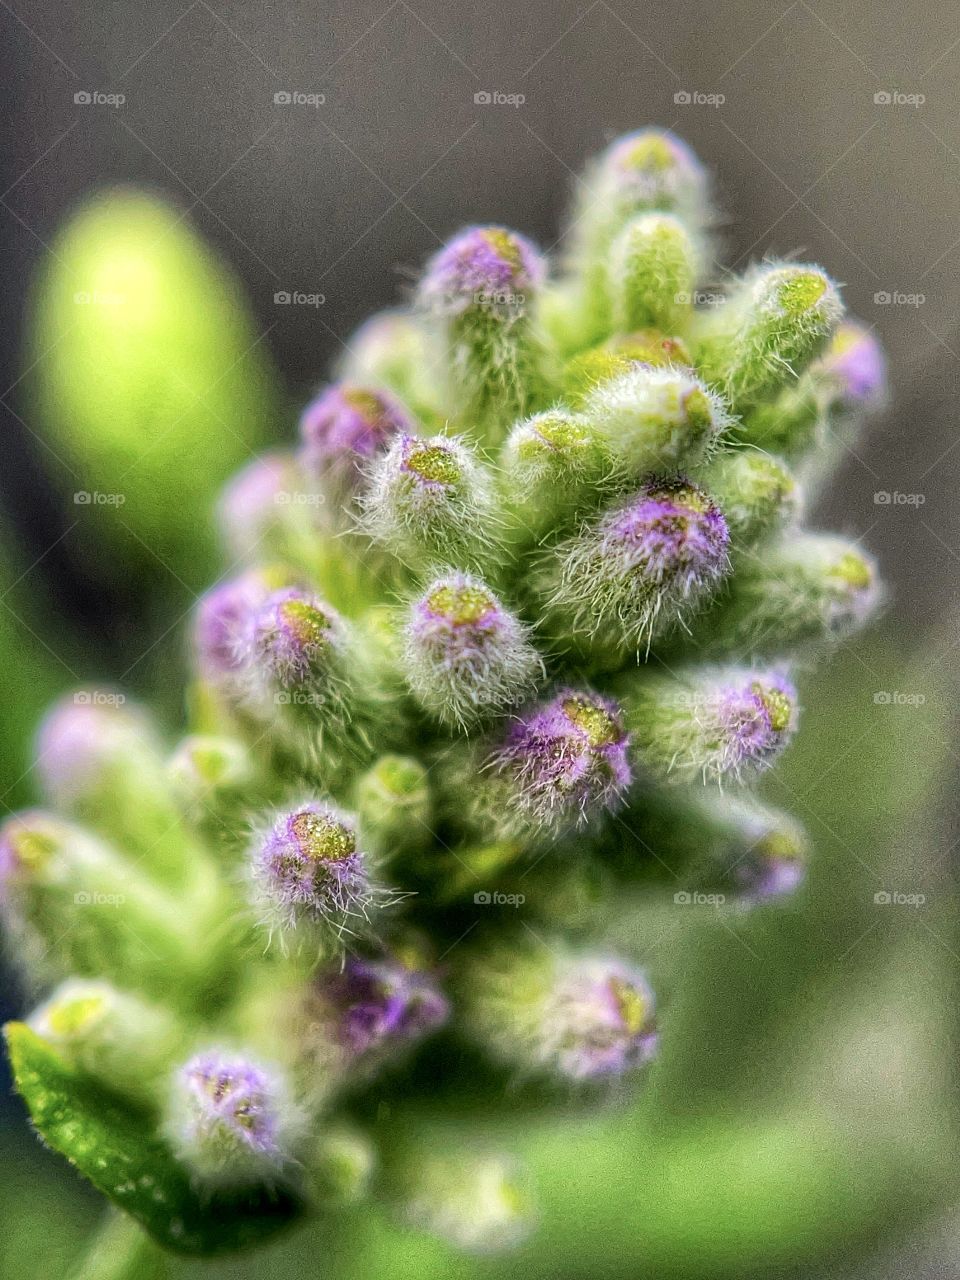 Lavender getting ready to bloom